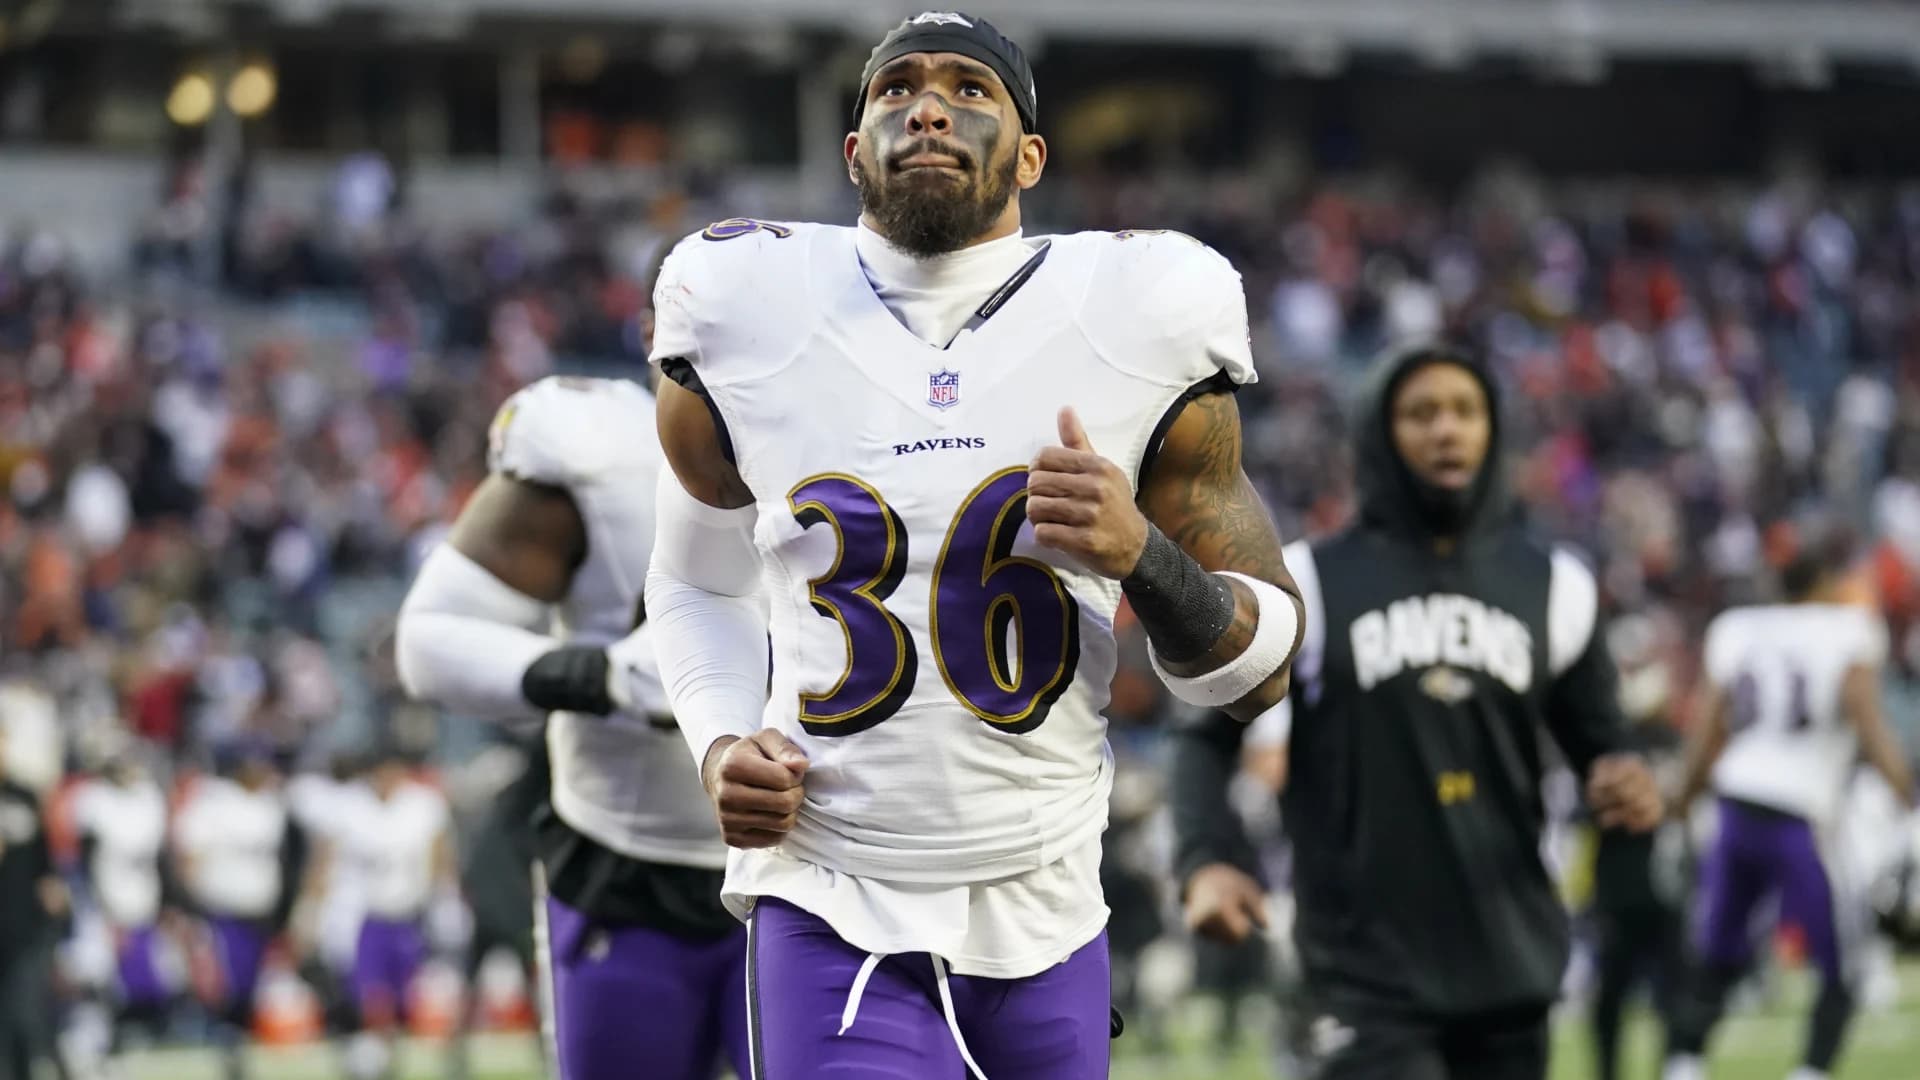 AP source: Jets agree on deal with Ravens to acquire safety Chuck Clark